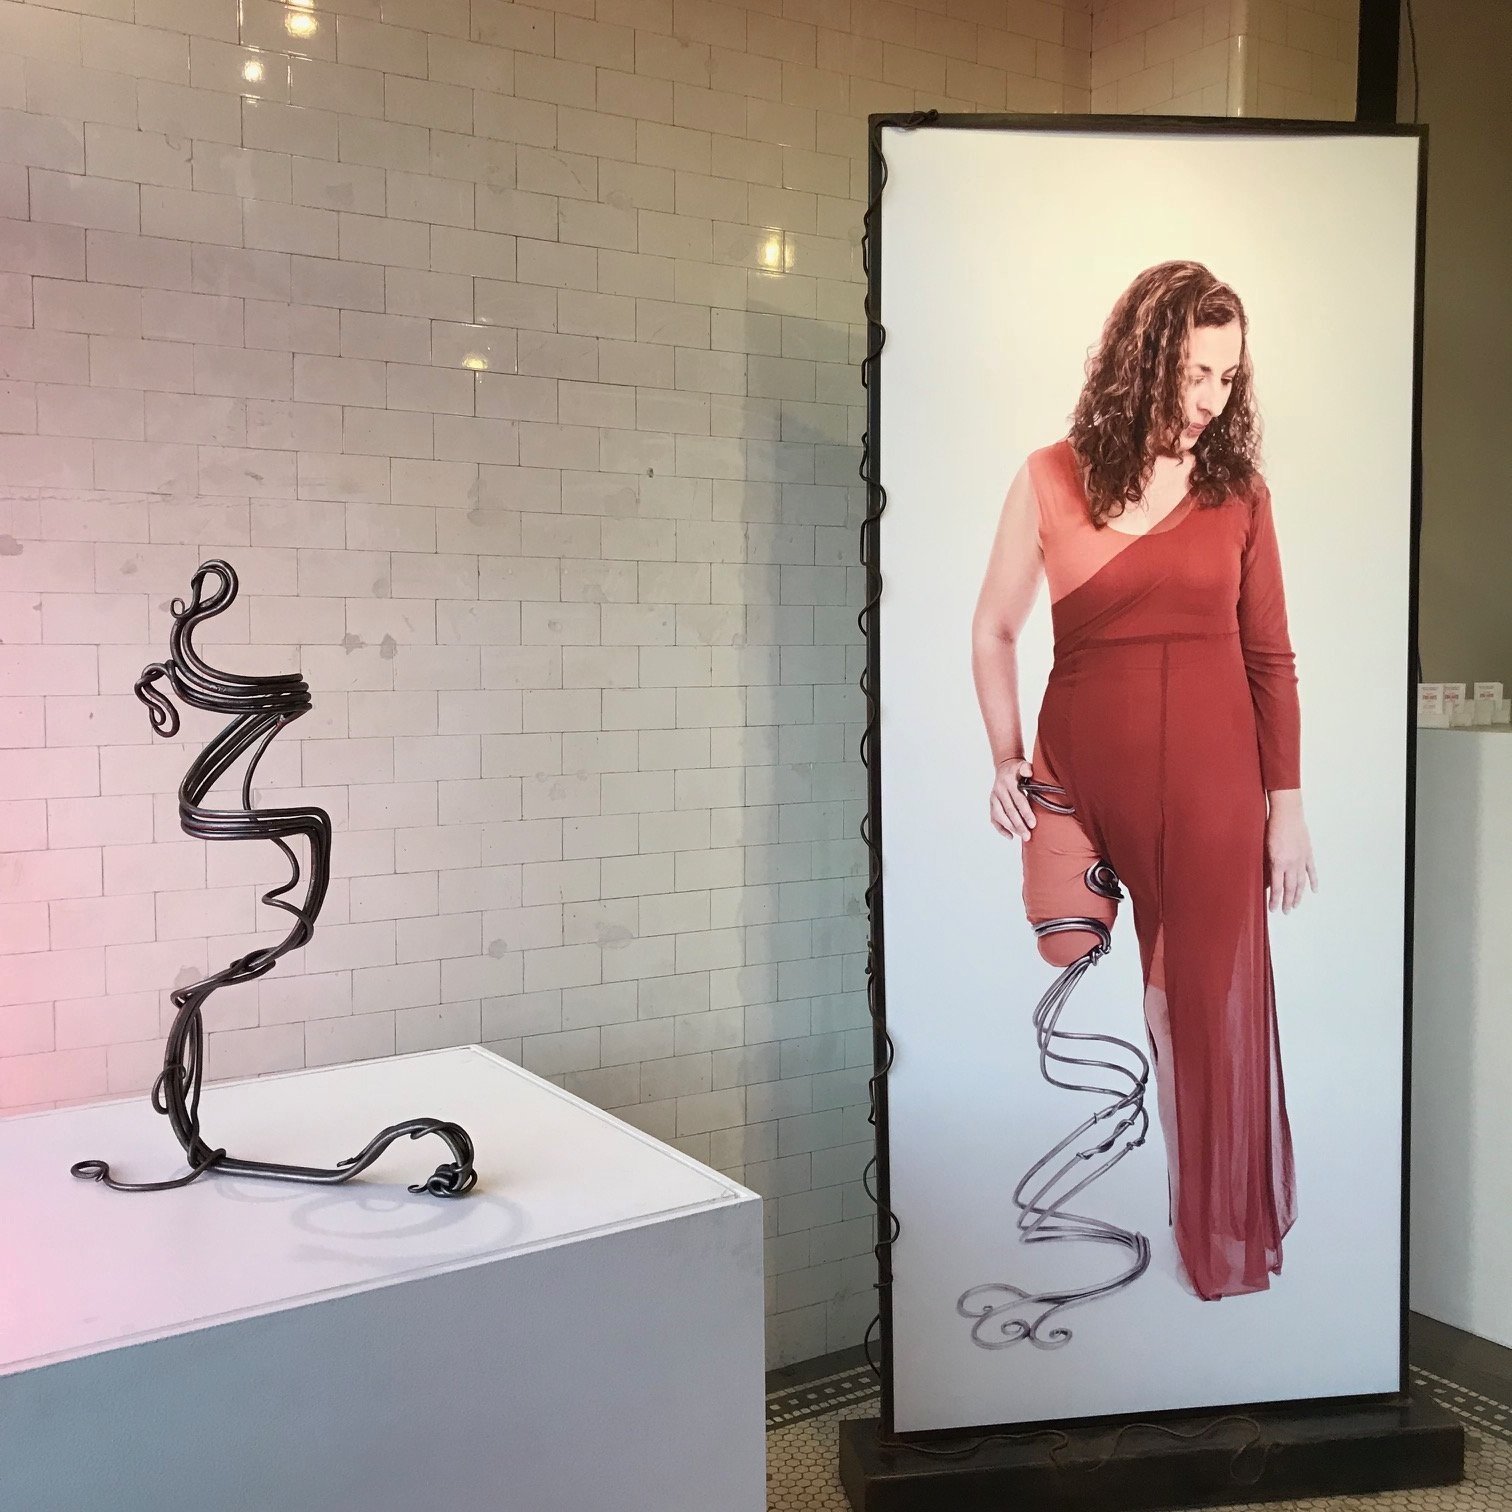 Photo of a curvilinear sculpture on a pedestal and a lifesized photograph next to it.